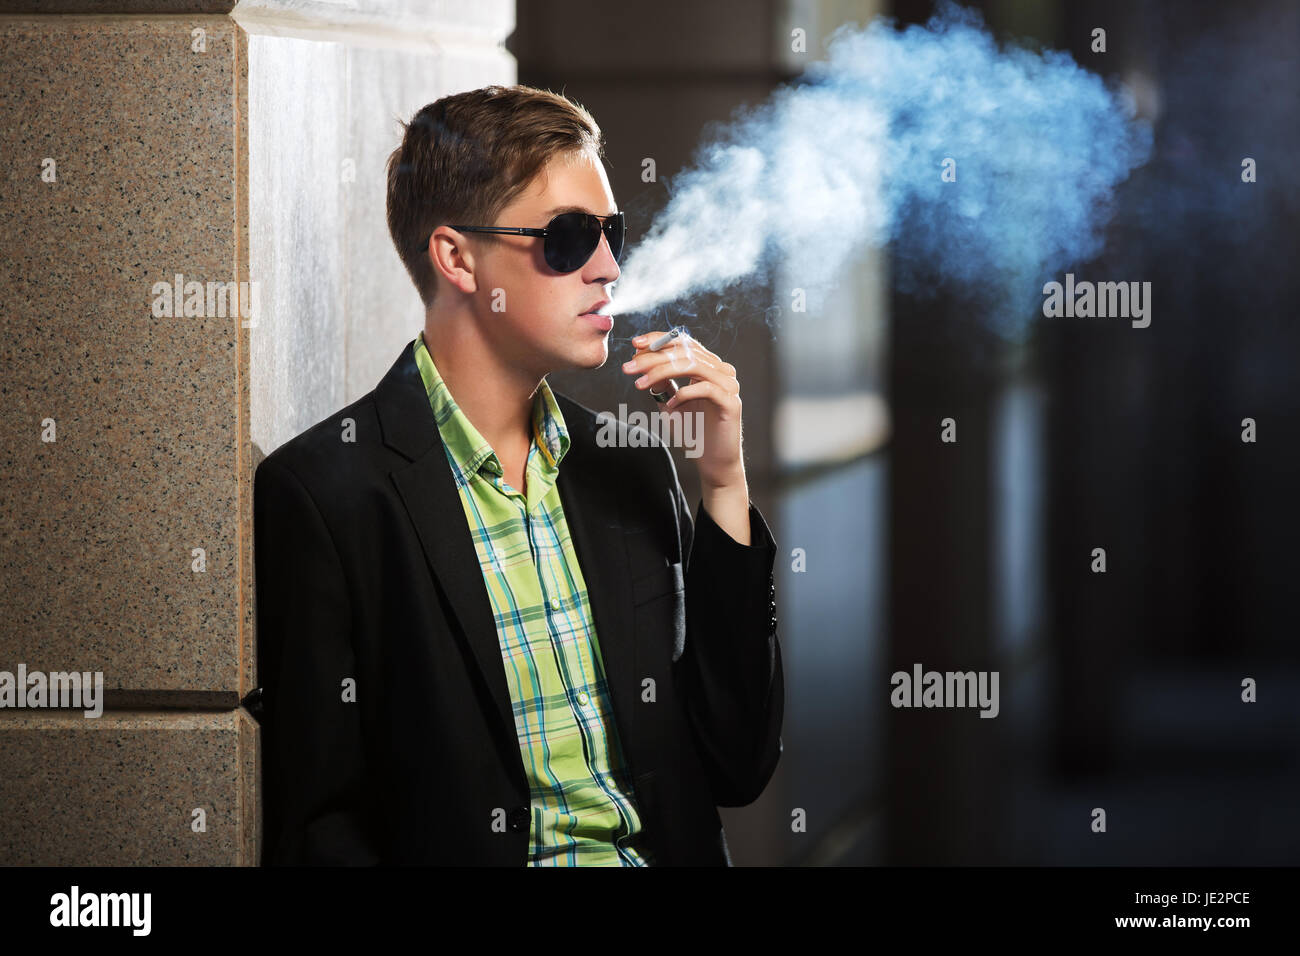 Young fashion man in sunglasses smoking a cigarette Stock Photo